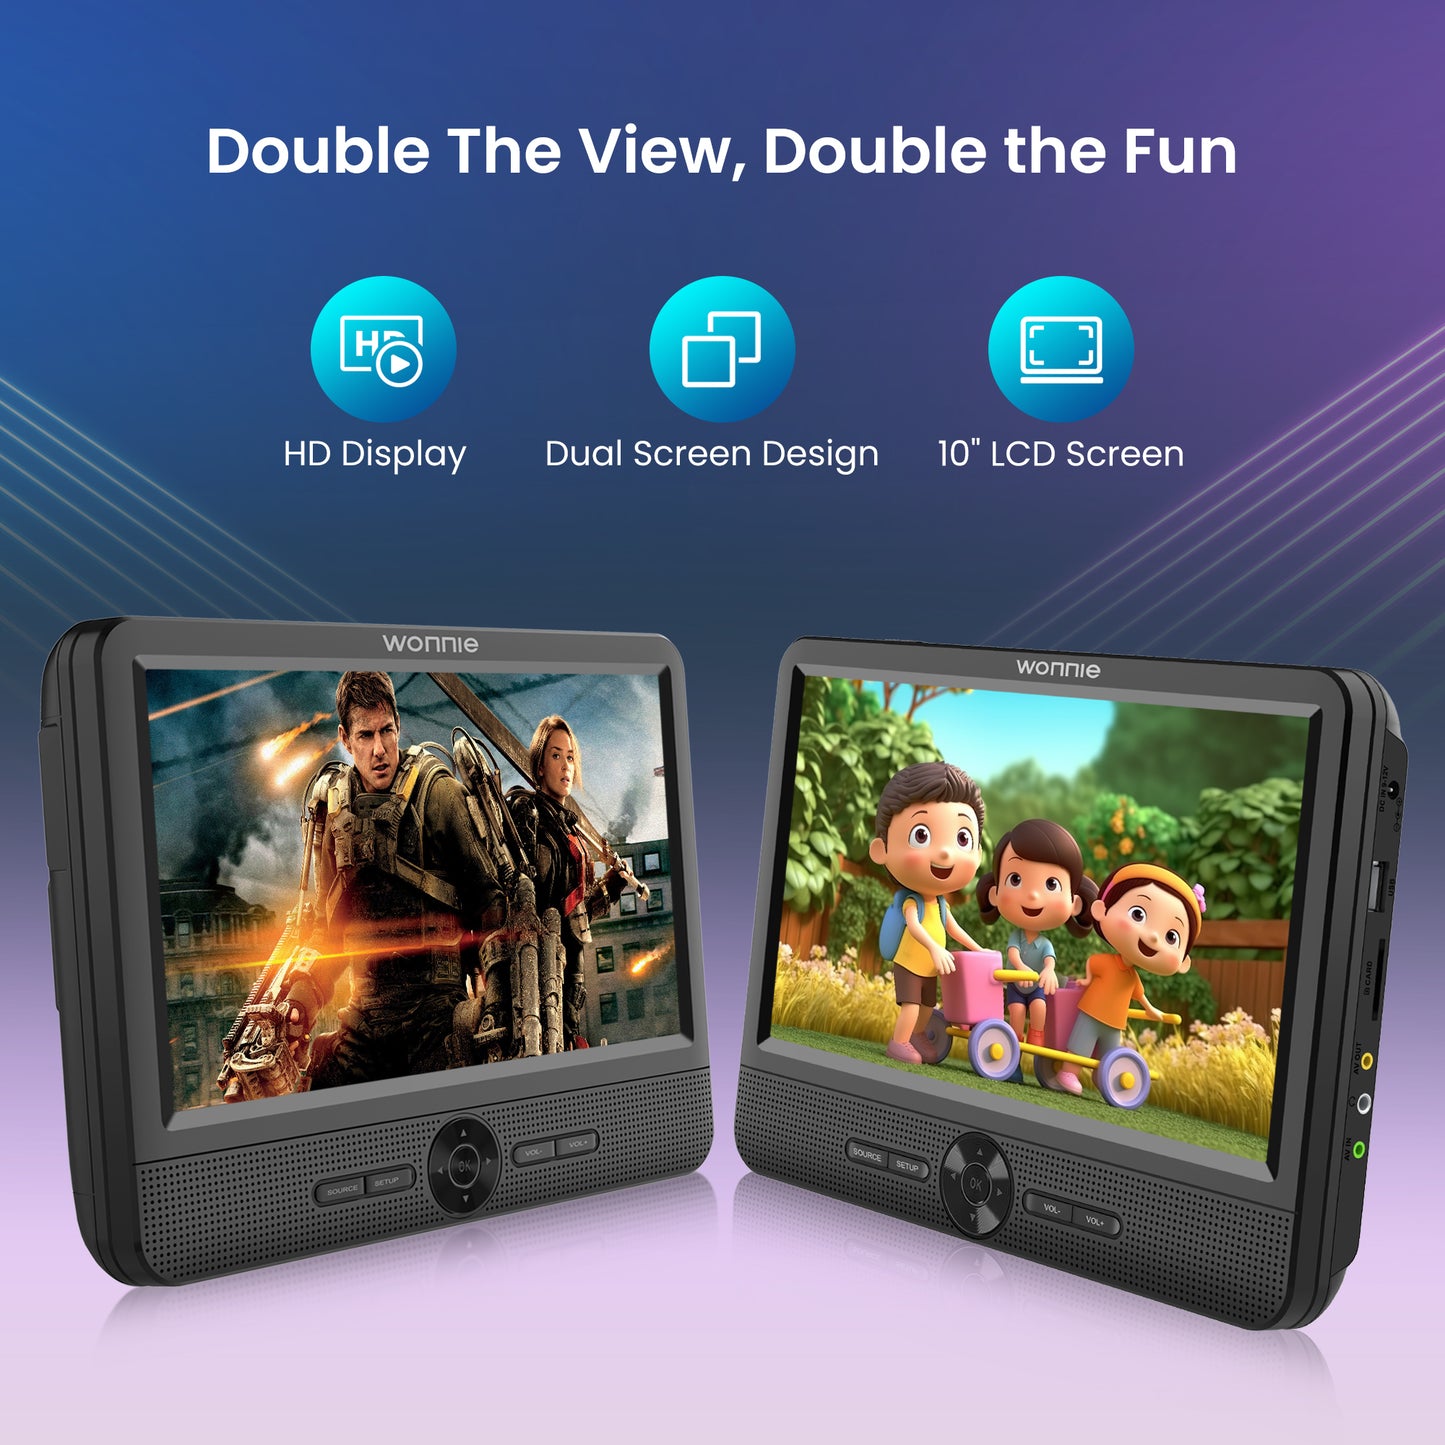 WONNIE 10” Portable Dual Screen DVD Players, Two Car DVD Player with Built-In Rechargeable Battery, Headrest DVD CD Player Support USB/ TF Card, AV In & Out, Best Gift Choice for Kids & Parents